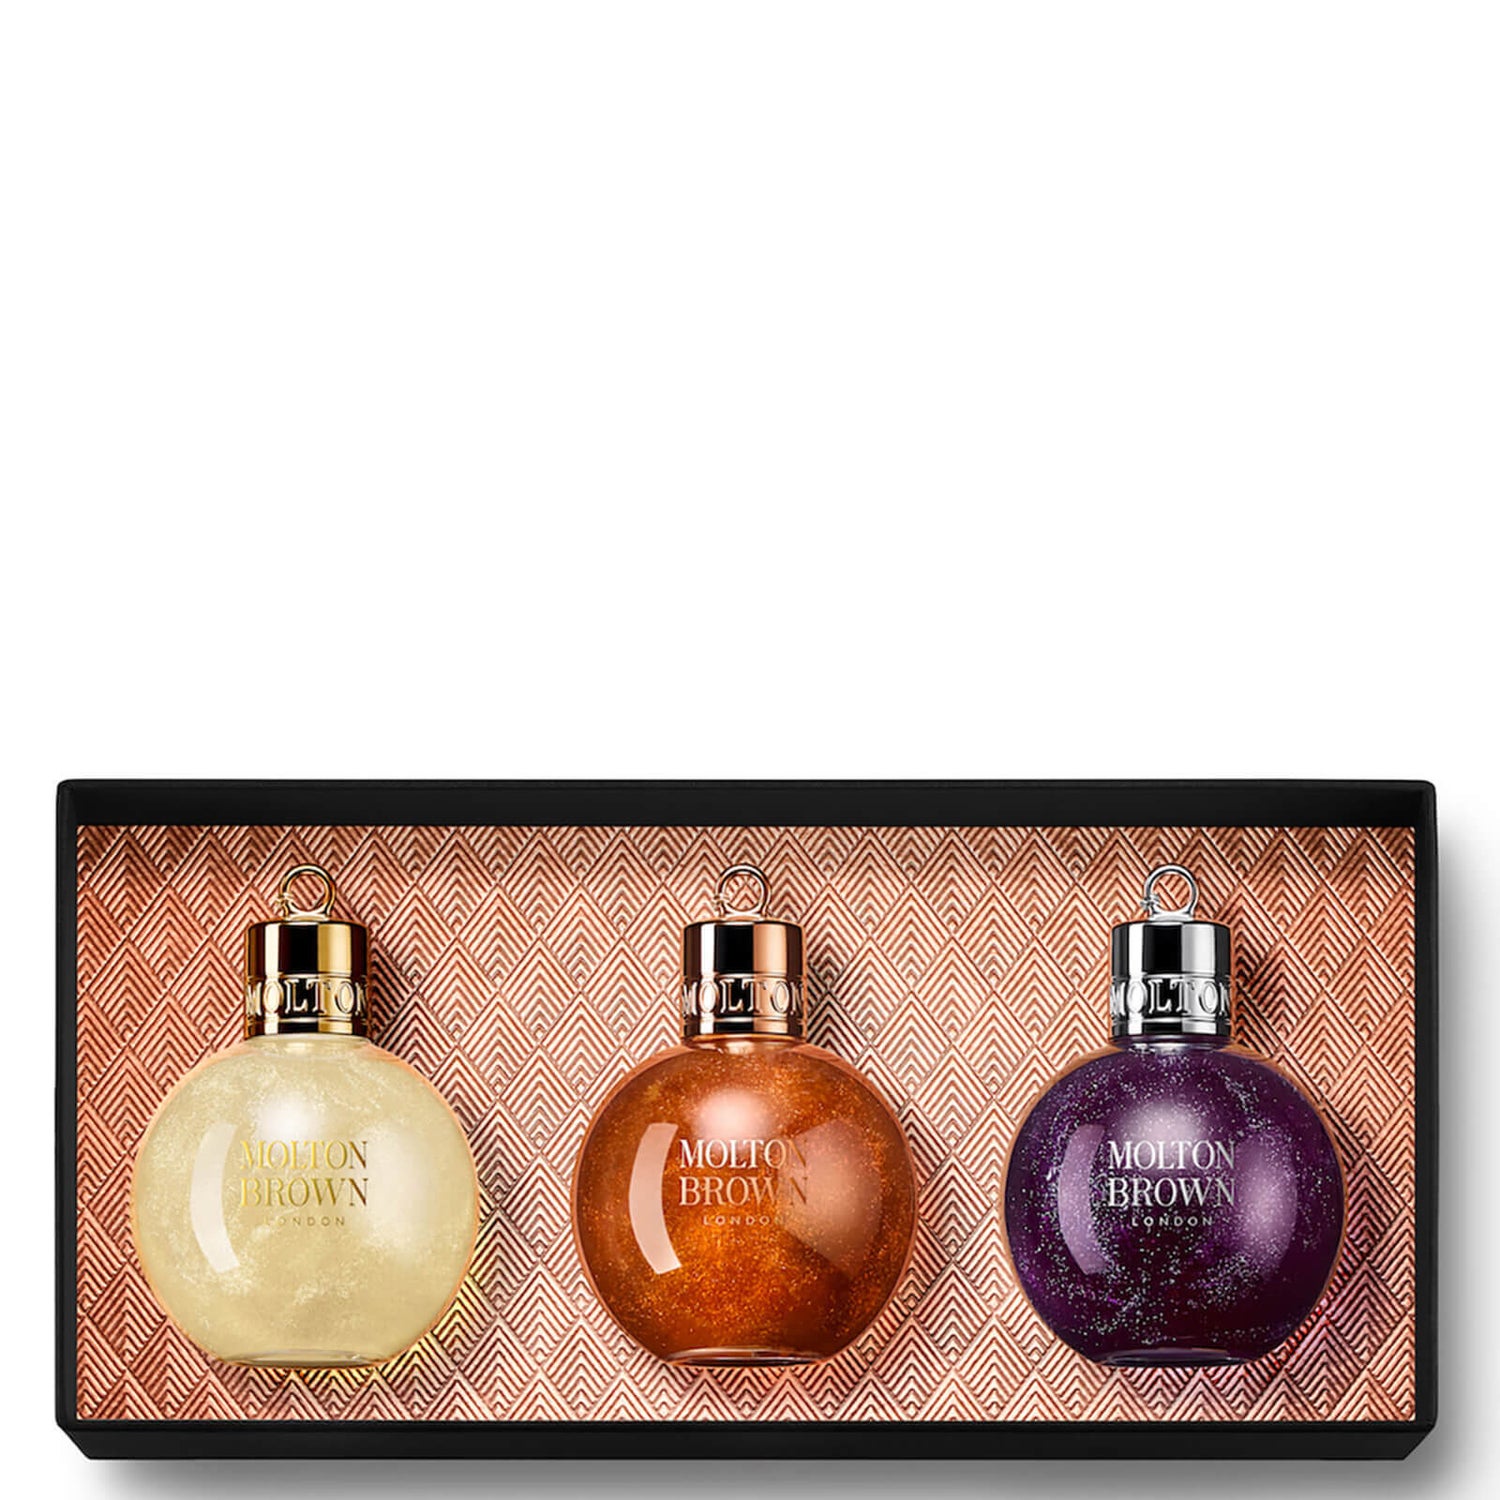 Molton Brown Festive Bauble Gift Set (Worth £42.00)